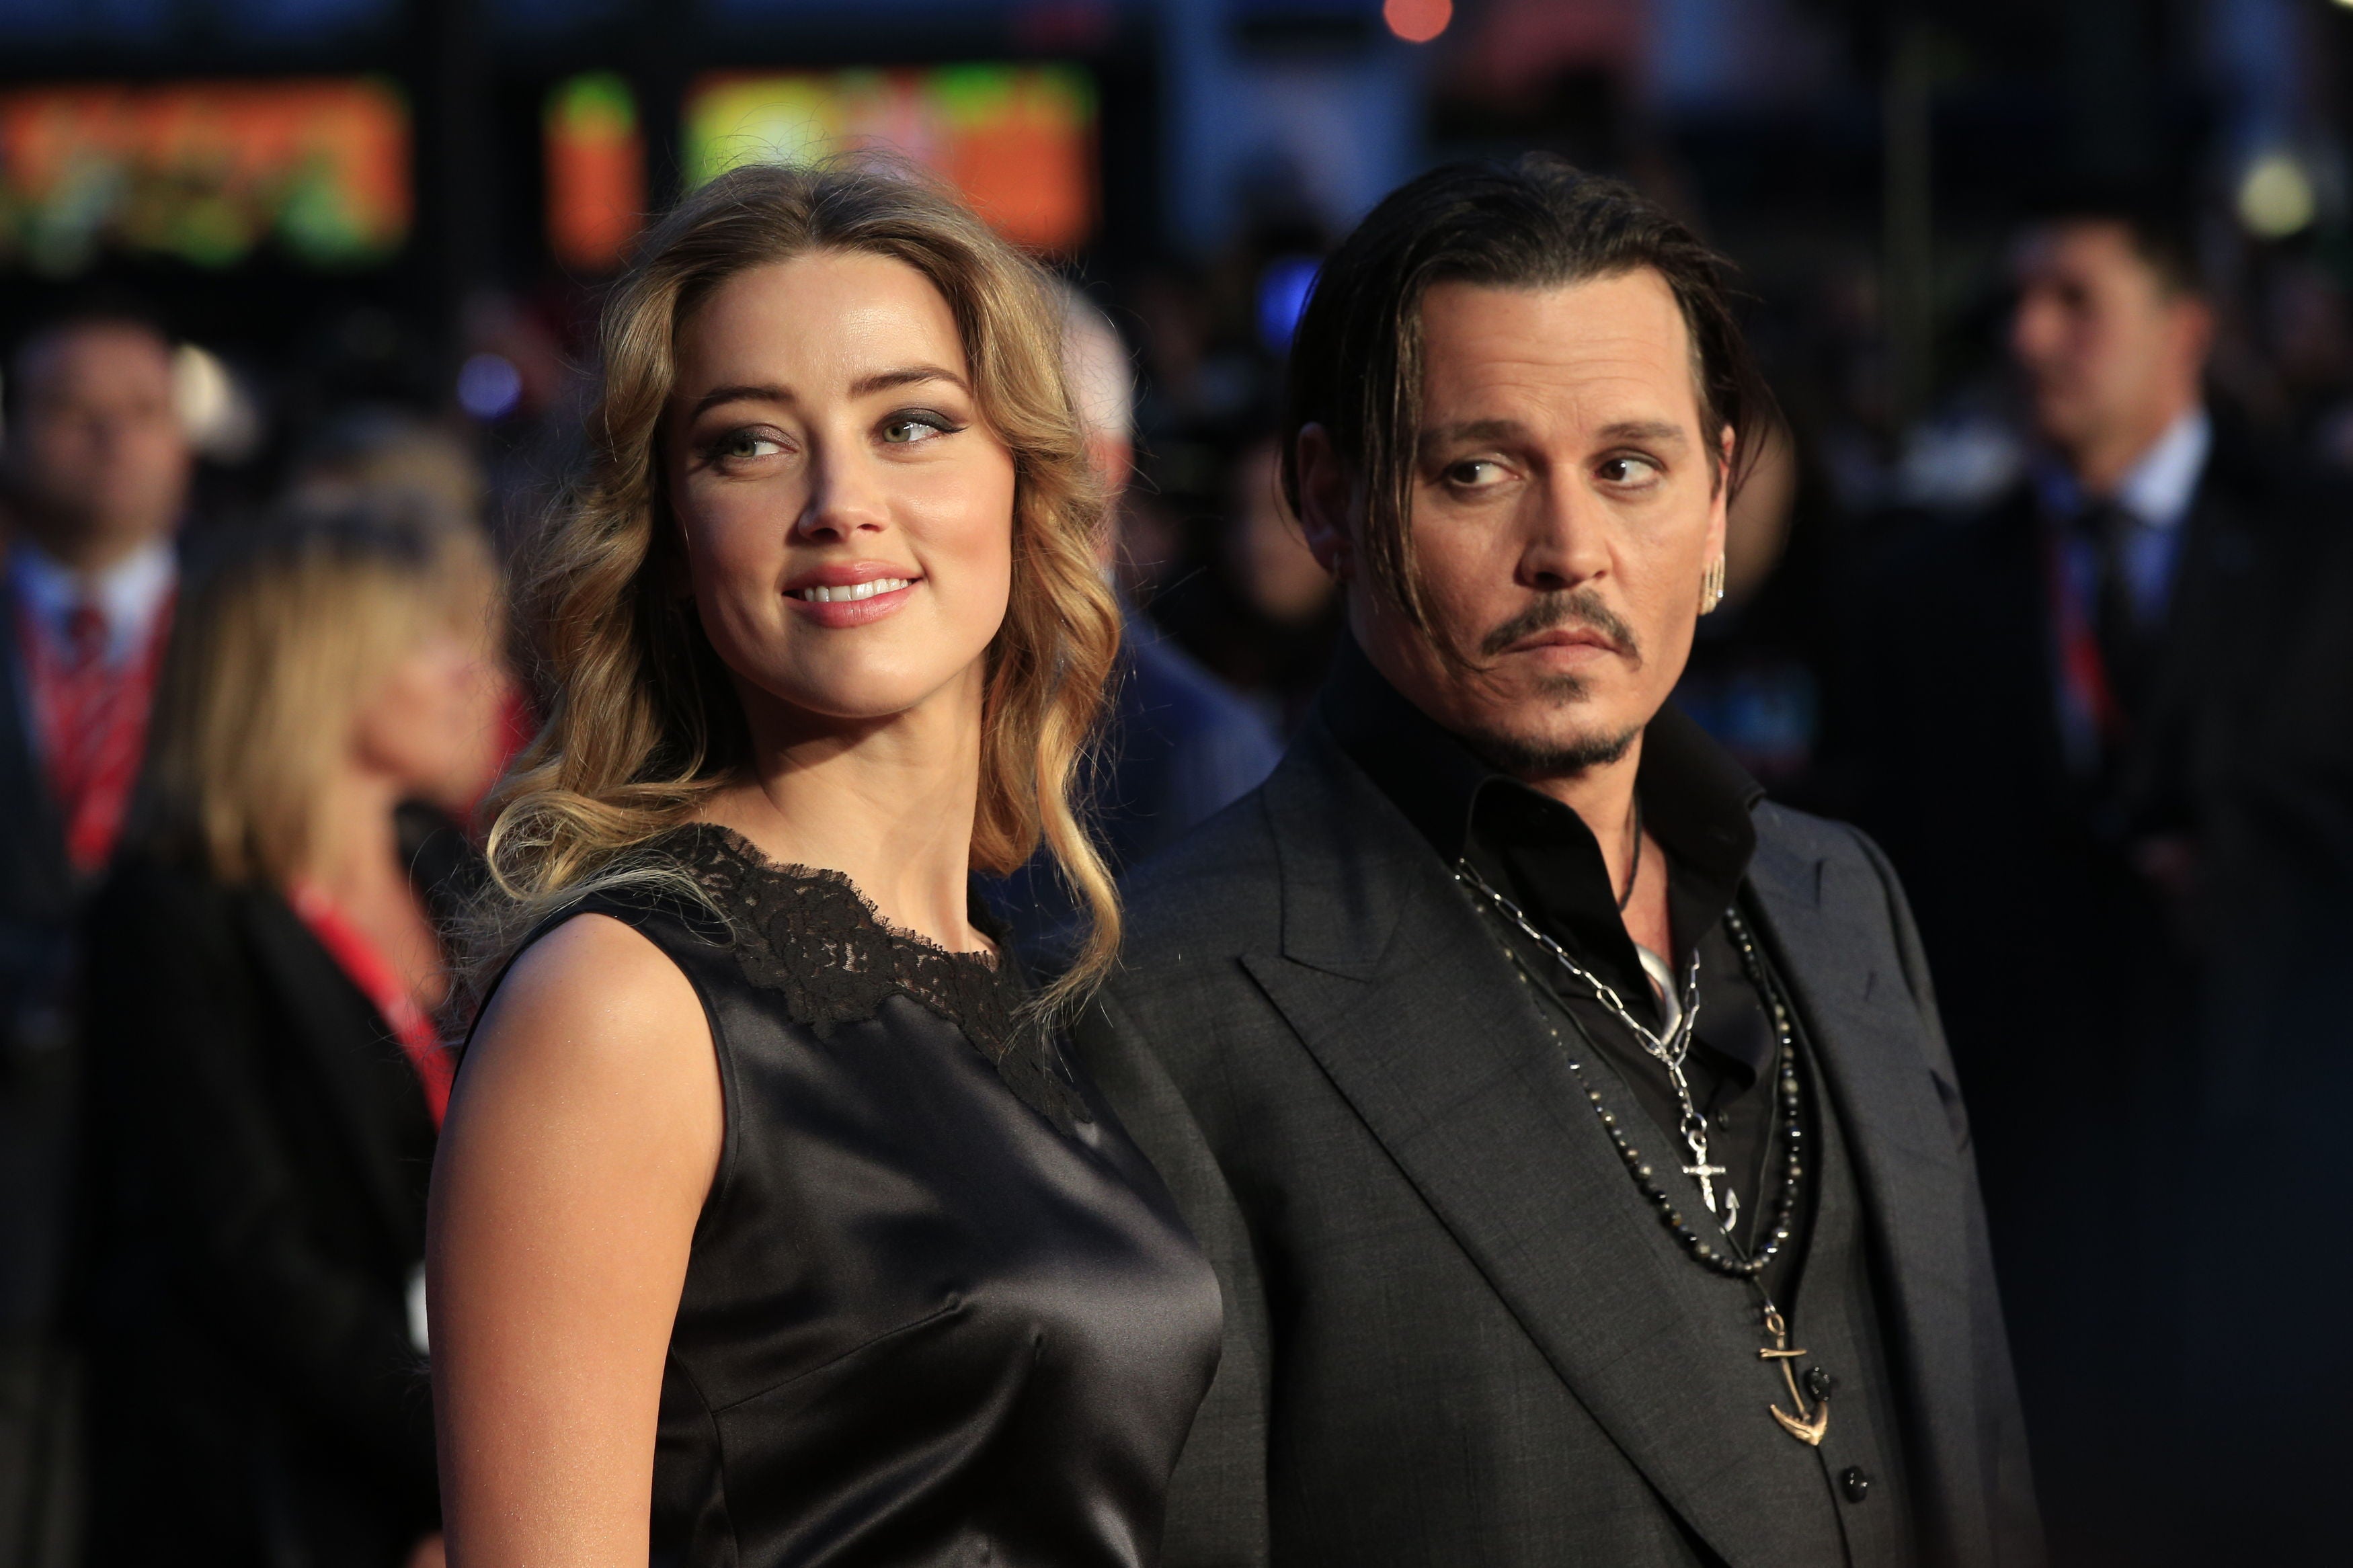 Johnny Depp sued The Sun after Wootton’s colum referred to him as a ‘wife beater’ following the breakdown of his marriage to Amber Heard